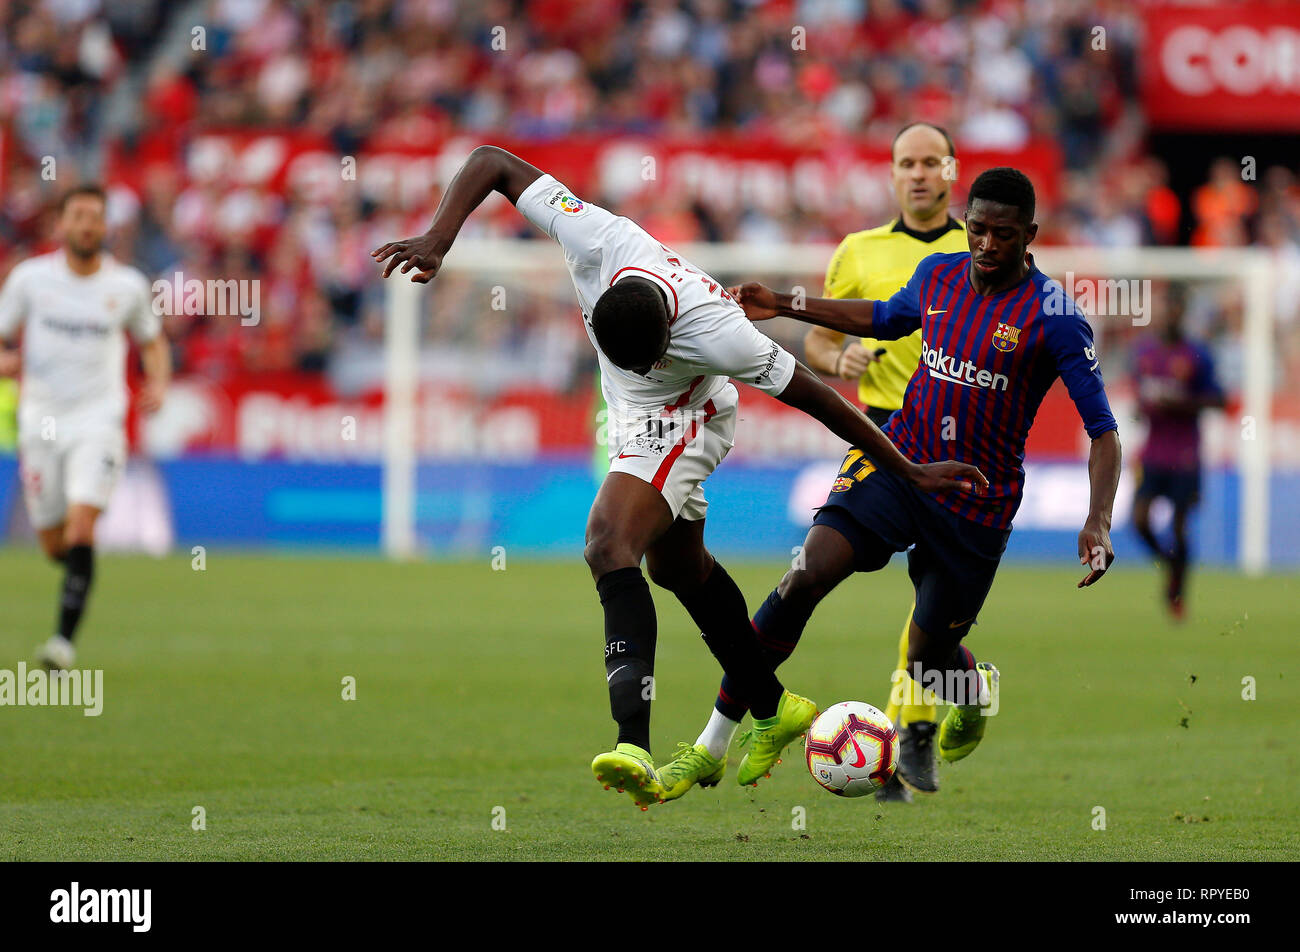 Ibrahim Amadou (Sevilla FC) and Ousmane Dembele (FC Barcelona) are seen in action during the La Liga match between Sevilla FC and Futbol Club Barcelona at Estadio Sanchez Pizjuan in Seville, Spain. ( Final score; Sevilla FC 2:4 Futbol Club Barcelona ) Stock Photo